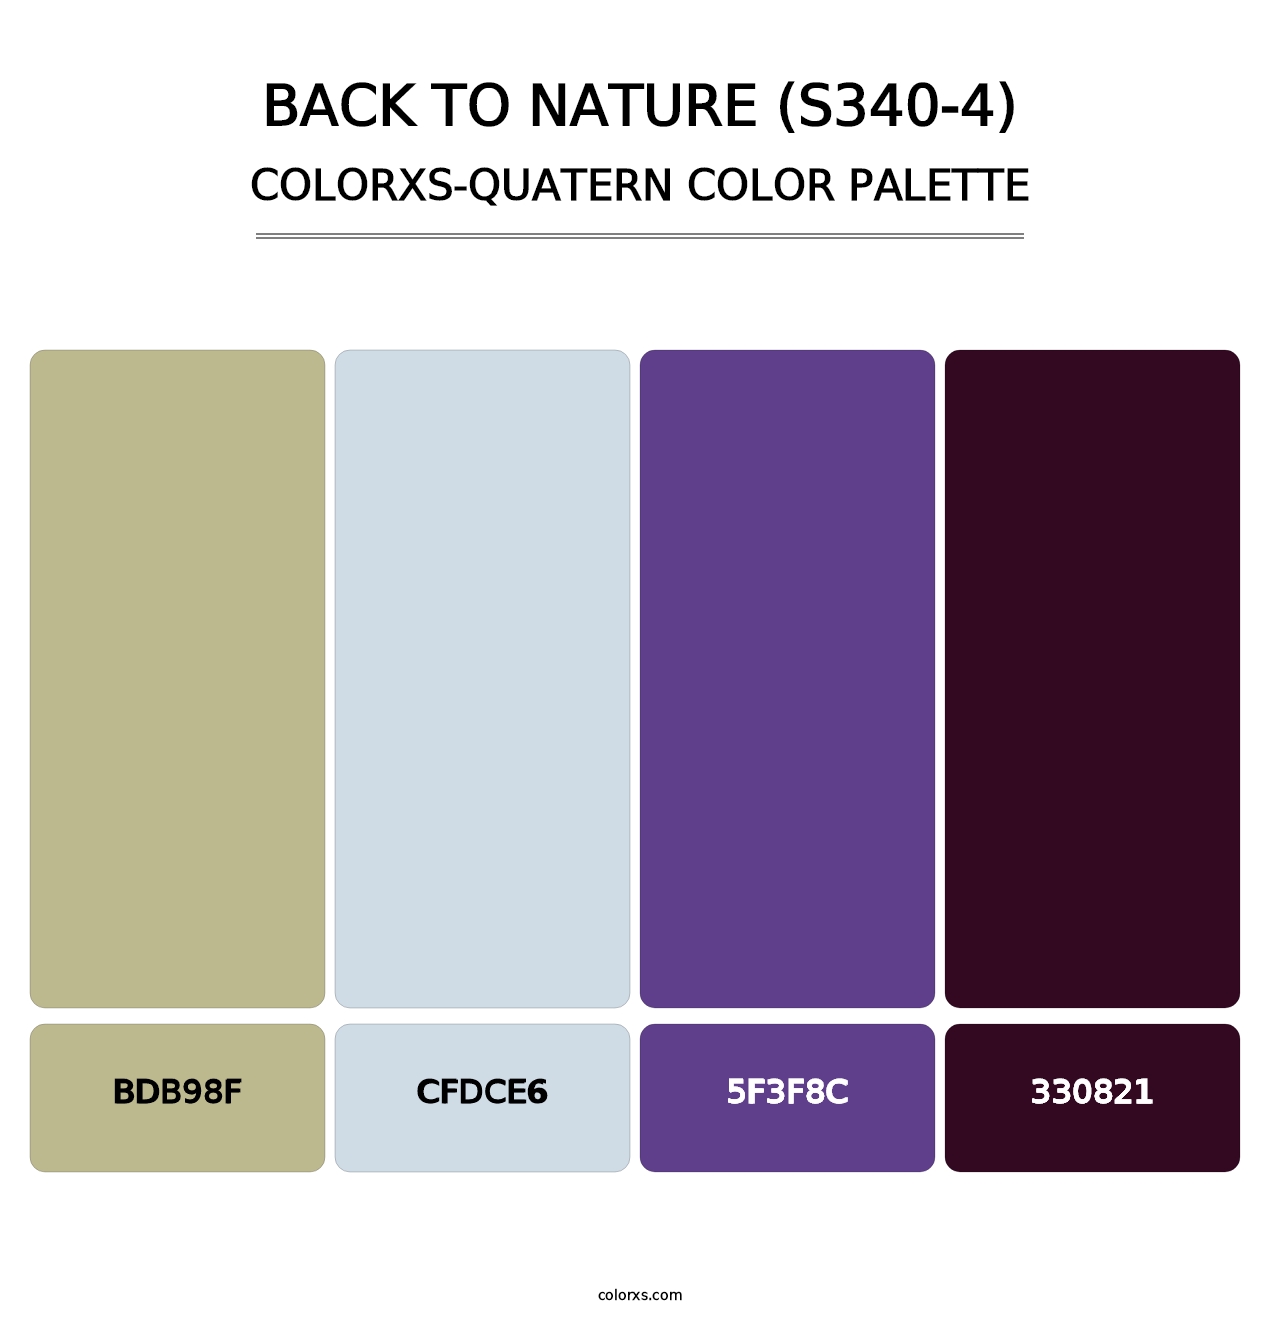 Back To Nature (S340-4) - Colorxs Quatern Palette